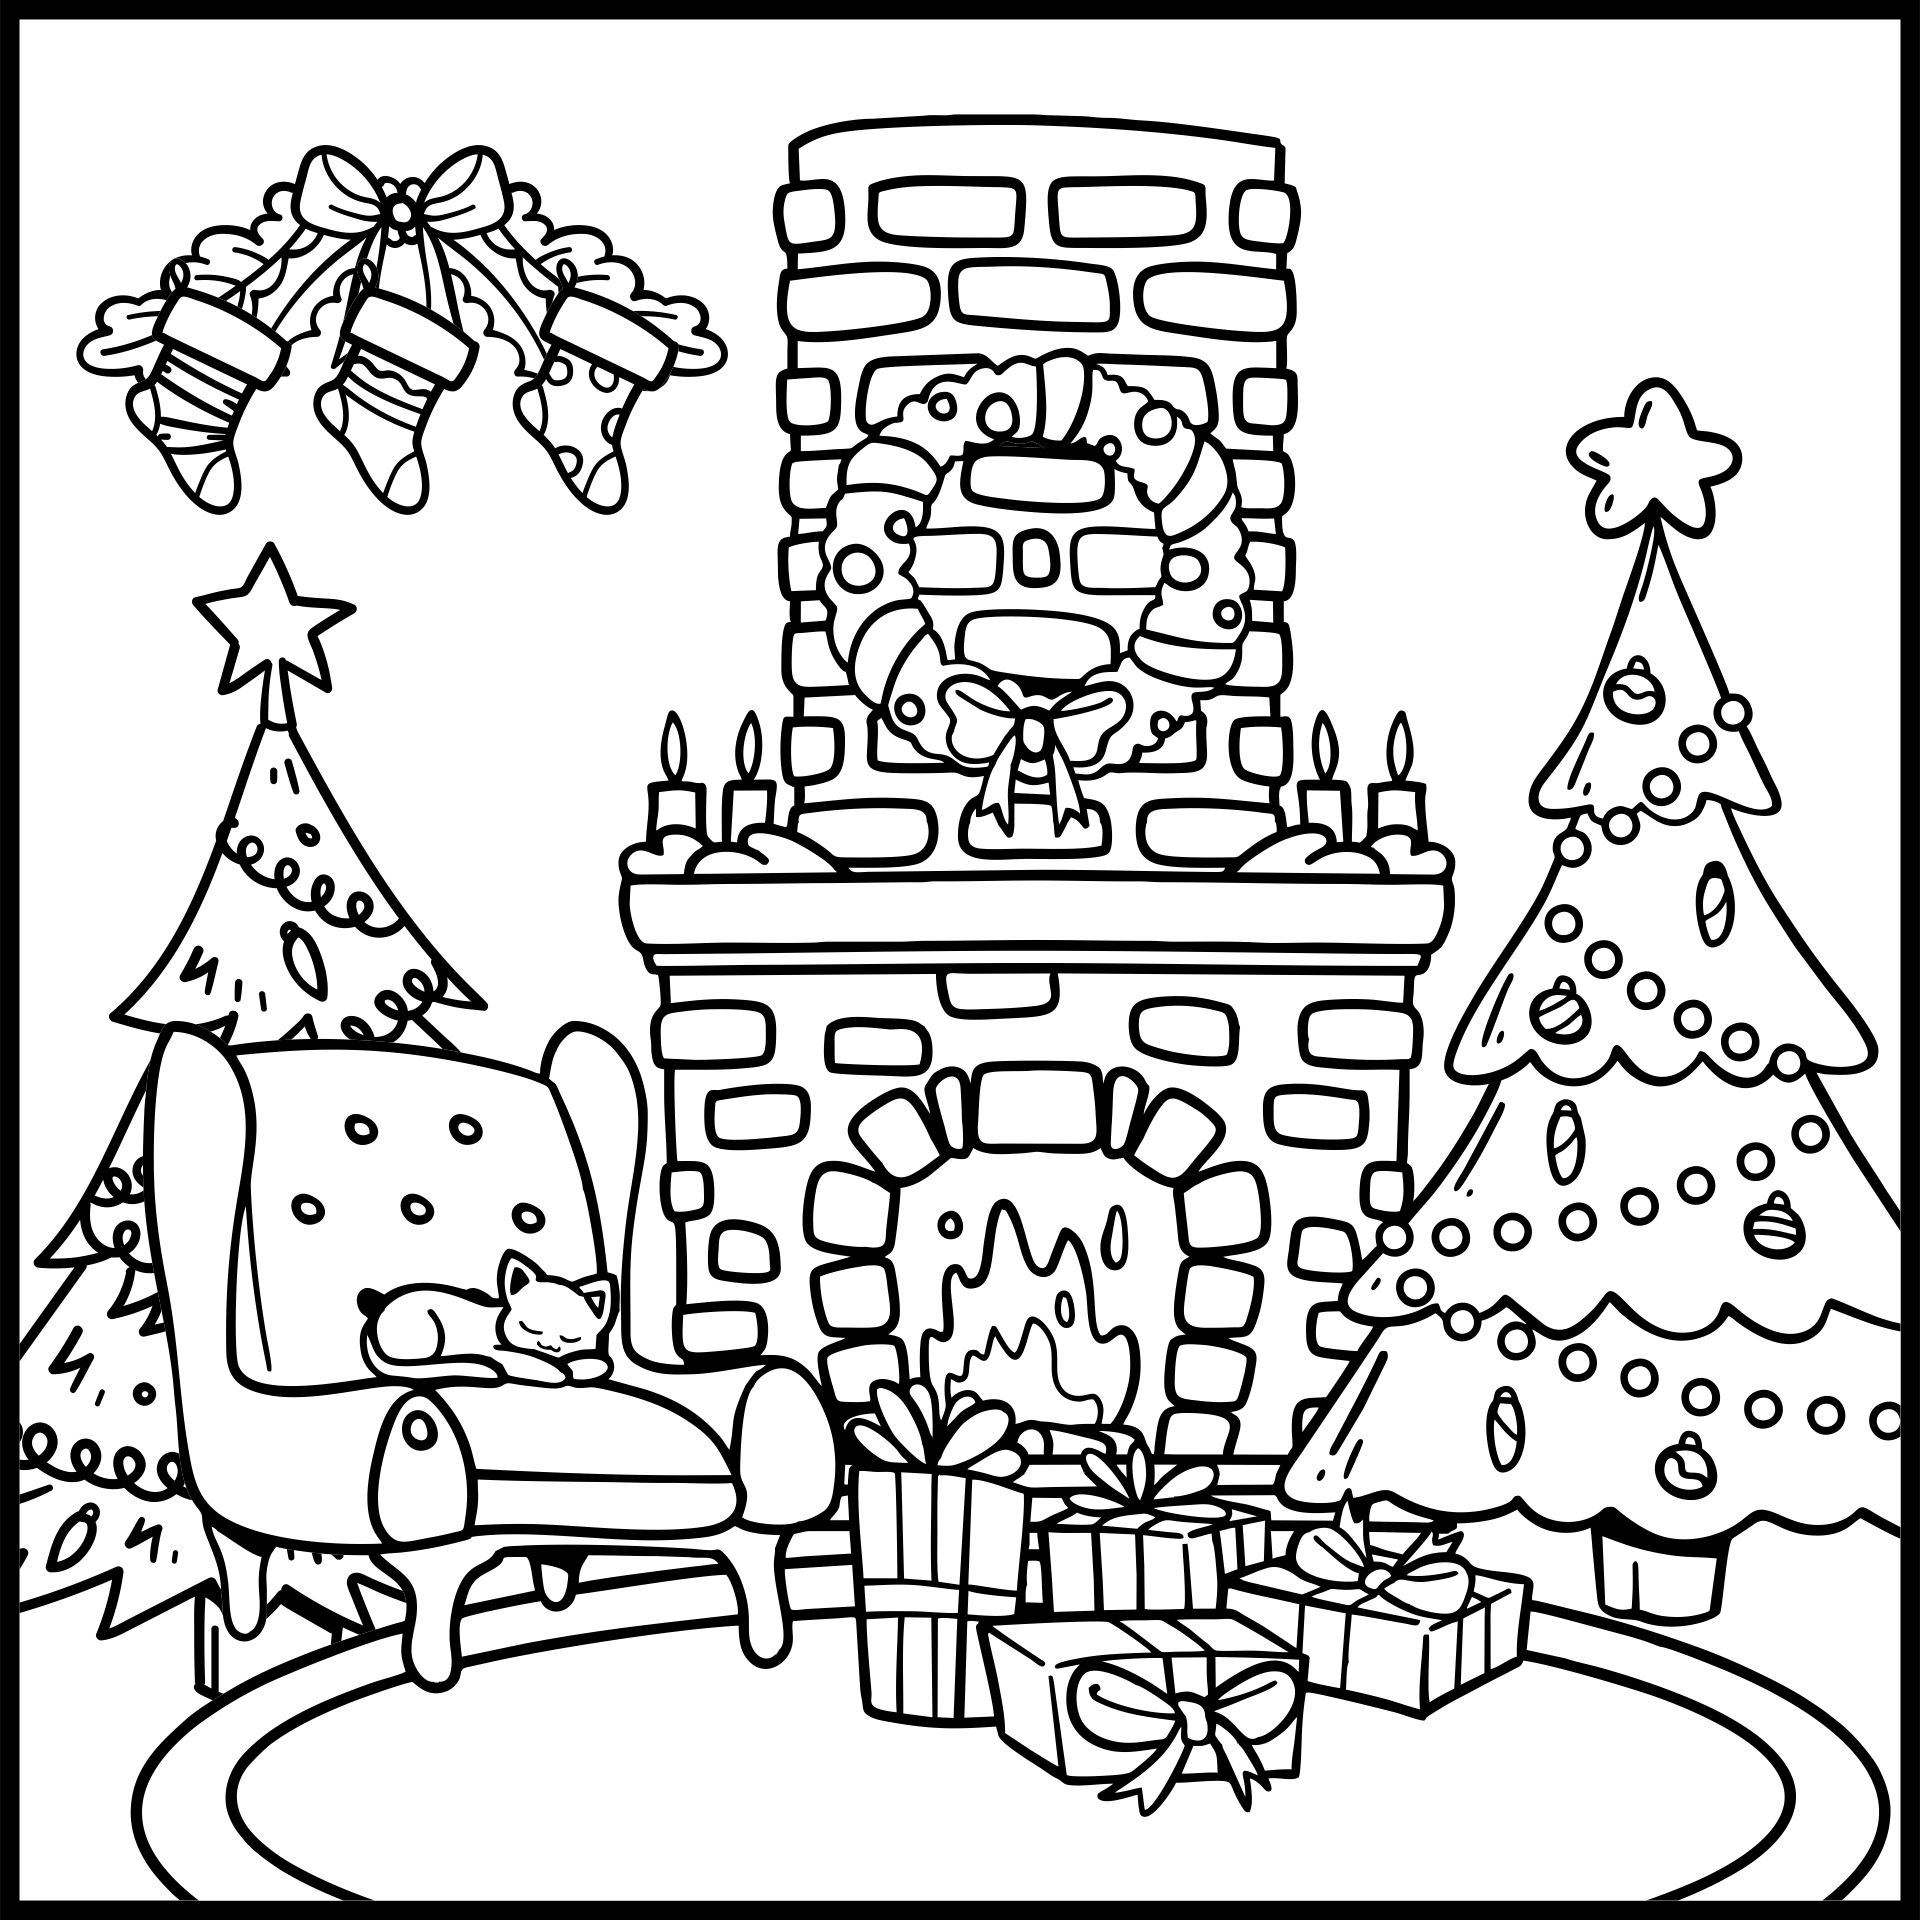 Printable Freecoloring Colouring Sketch Coloring Page